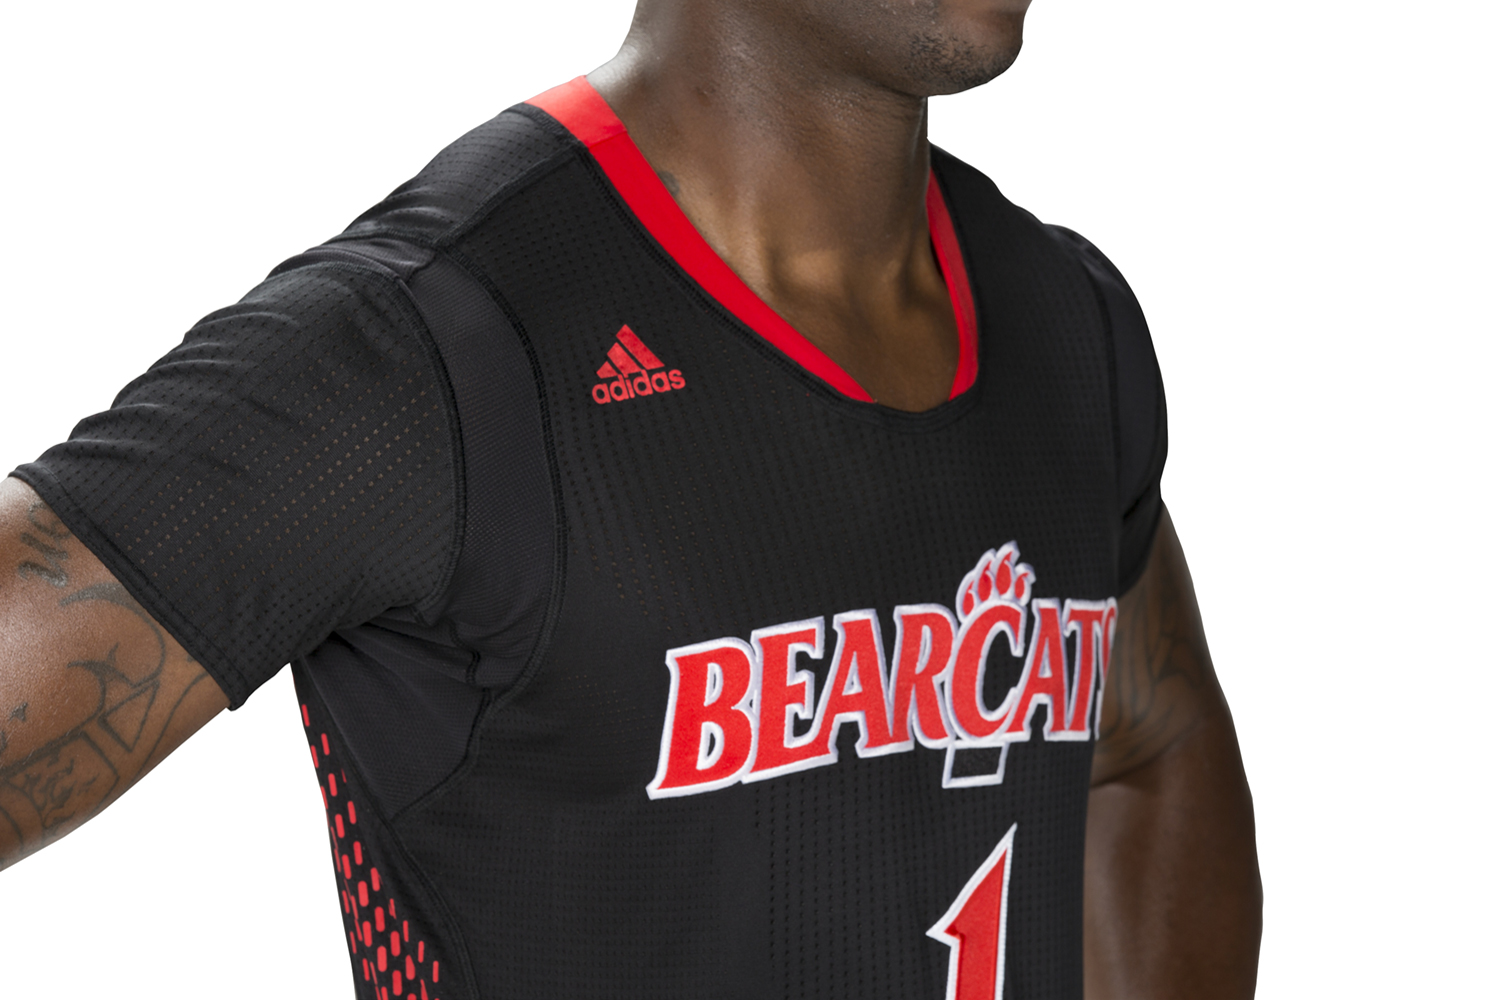 adidas Unveils 2014 Made In March NCAA Basketball Uniforms